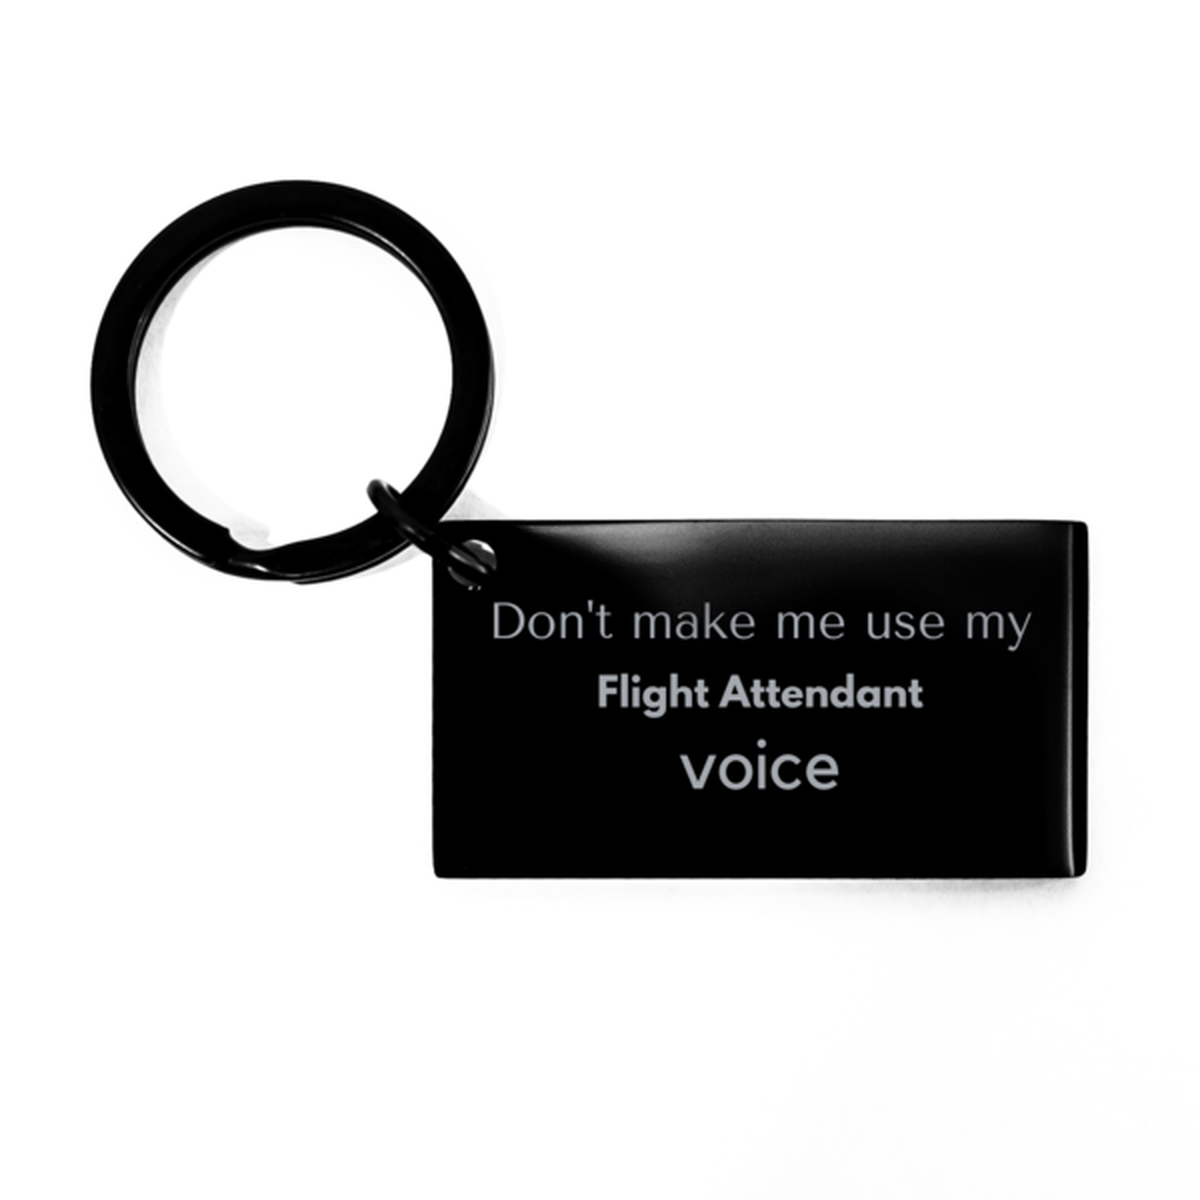 Don't make me use my Flight Attendant voice, Sarcasm Flight Attendant Gifts, Christmas Flight Attendant Keychain Birthday Unique Gifts For Flight Attendant Coworkers, Men, Women, Colleague, Friends